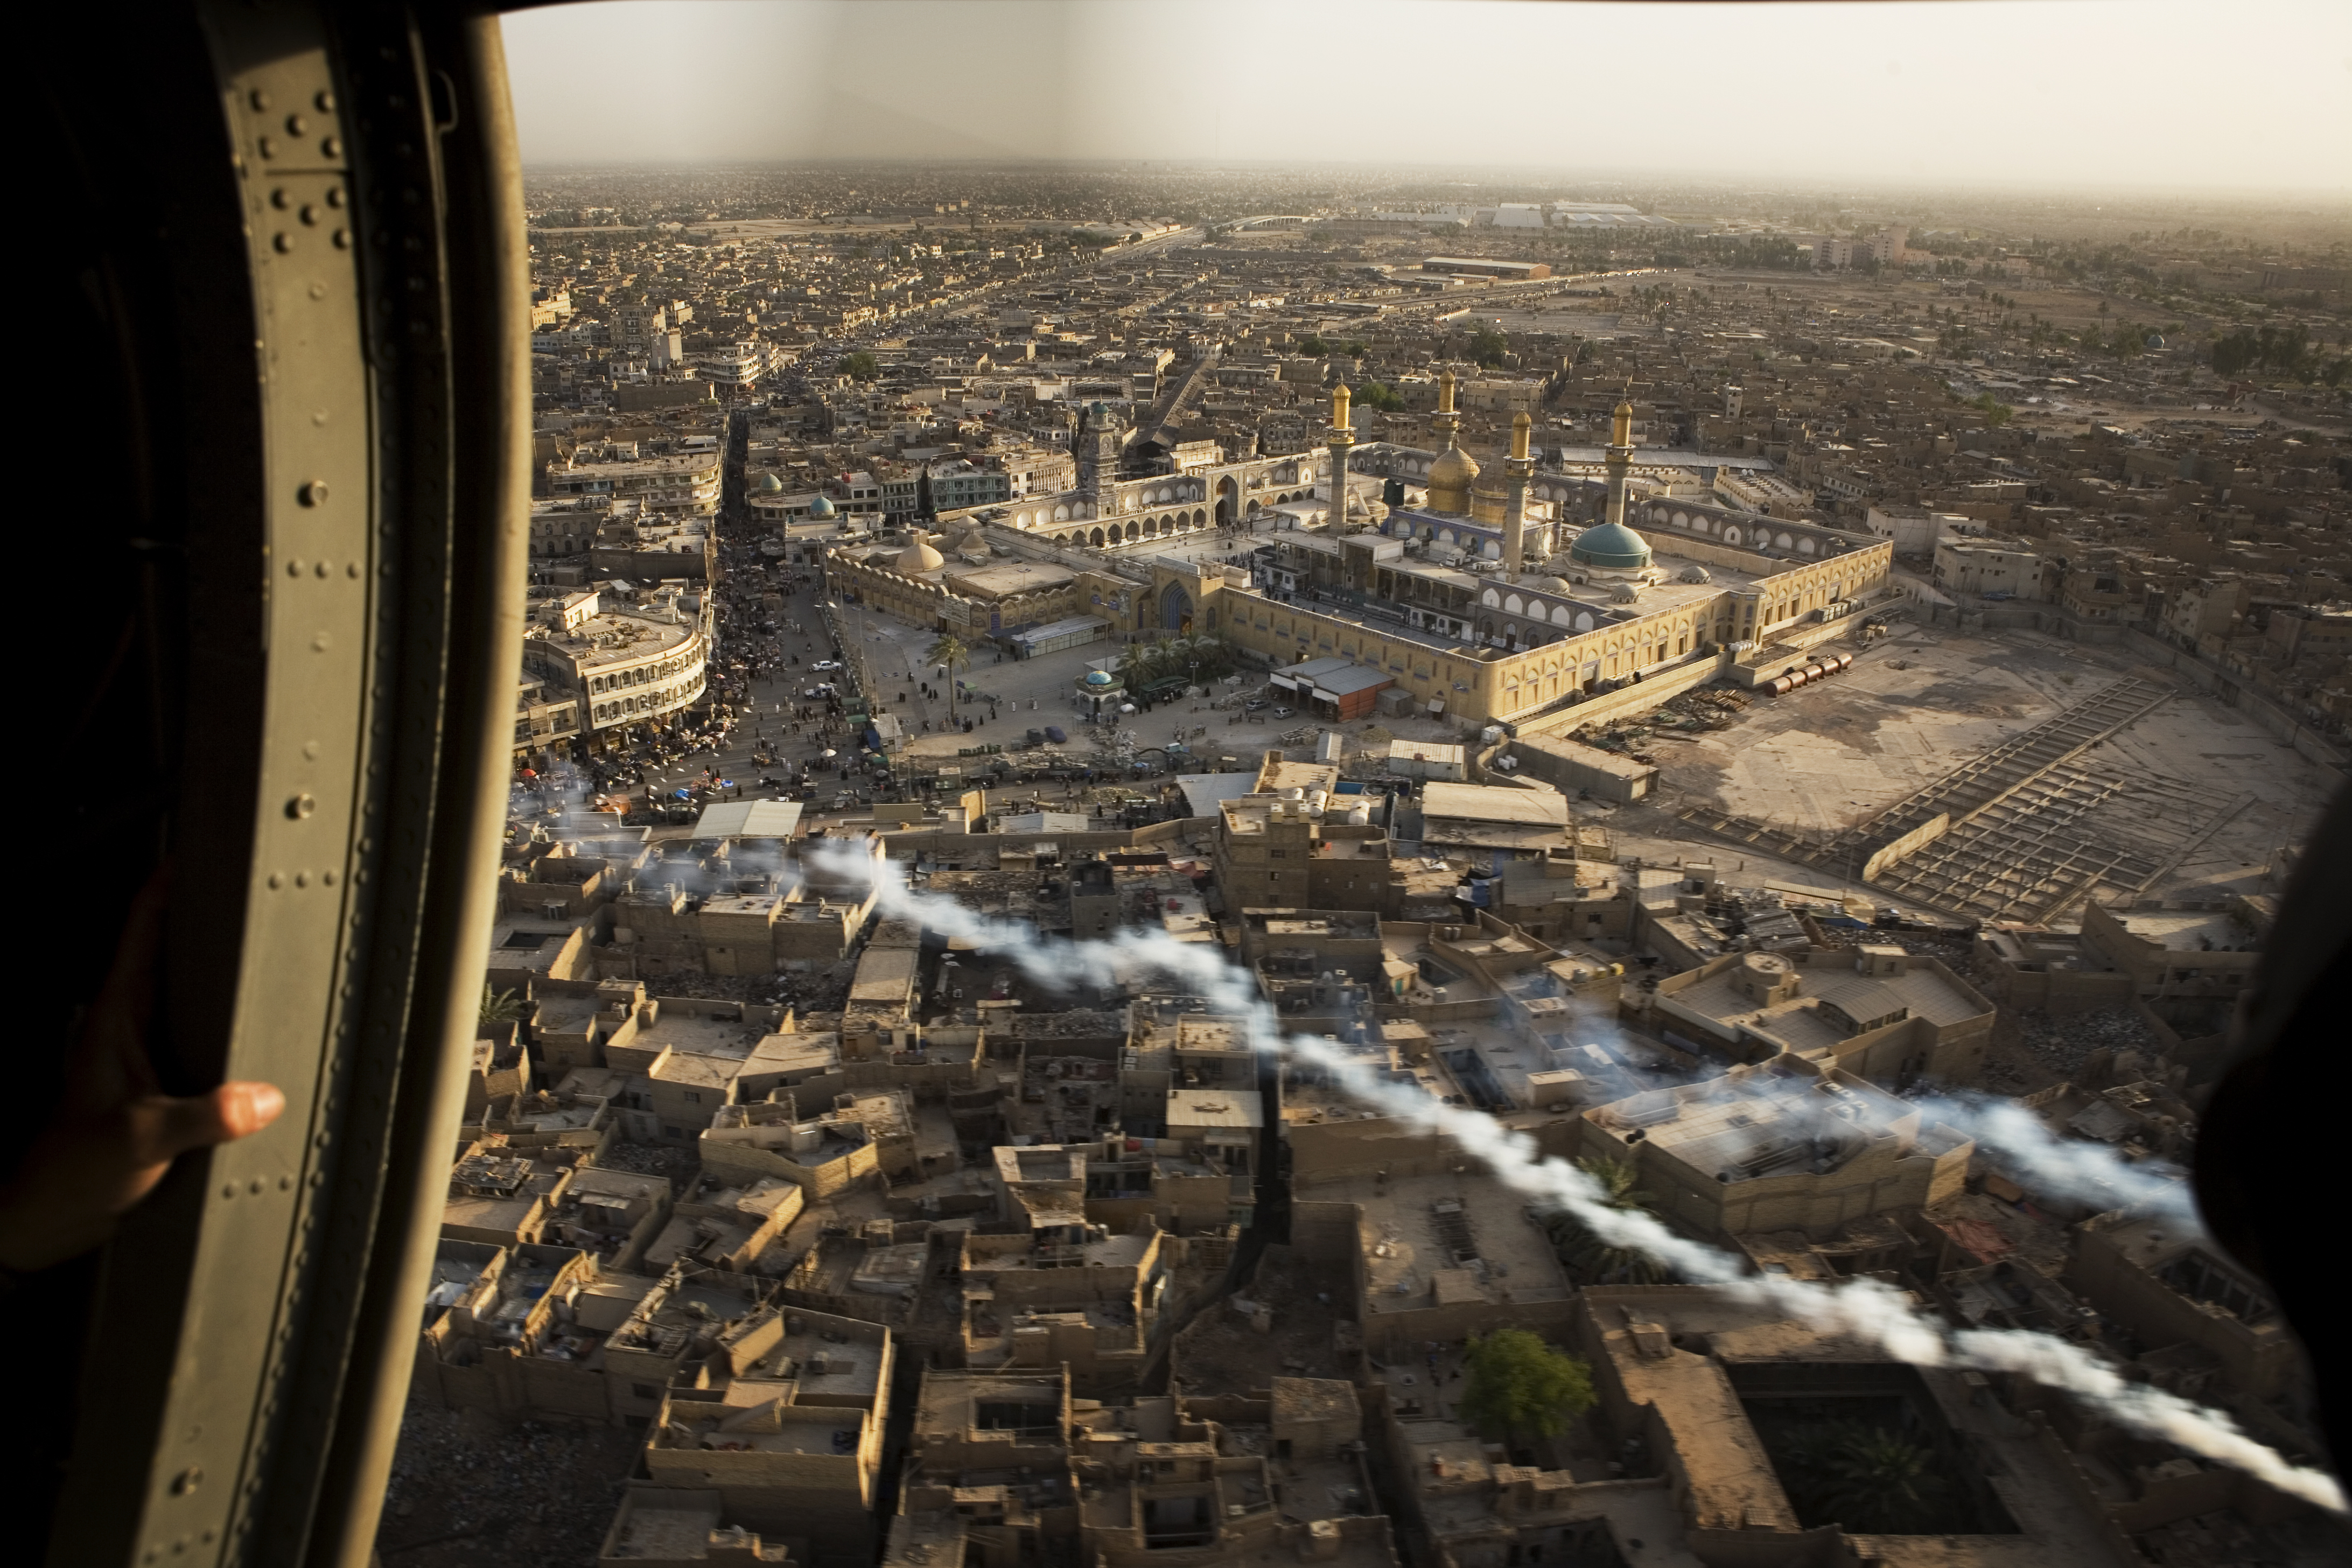 The view of the Kadamiya mosque in Baghdad, one of the most important Shi'ite shrines in Iraq, as seen from the helicopter of General David Petraeus, June 23, 2007.